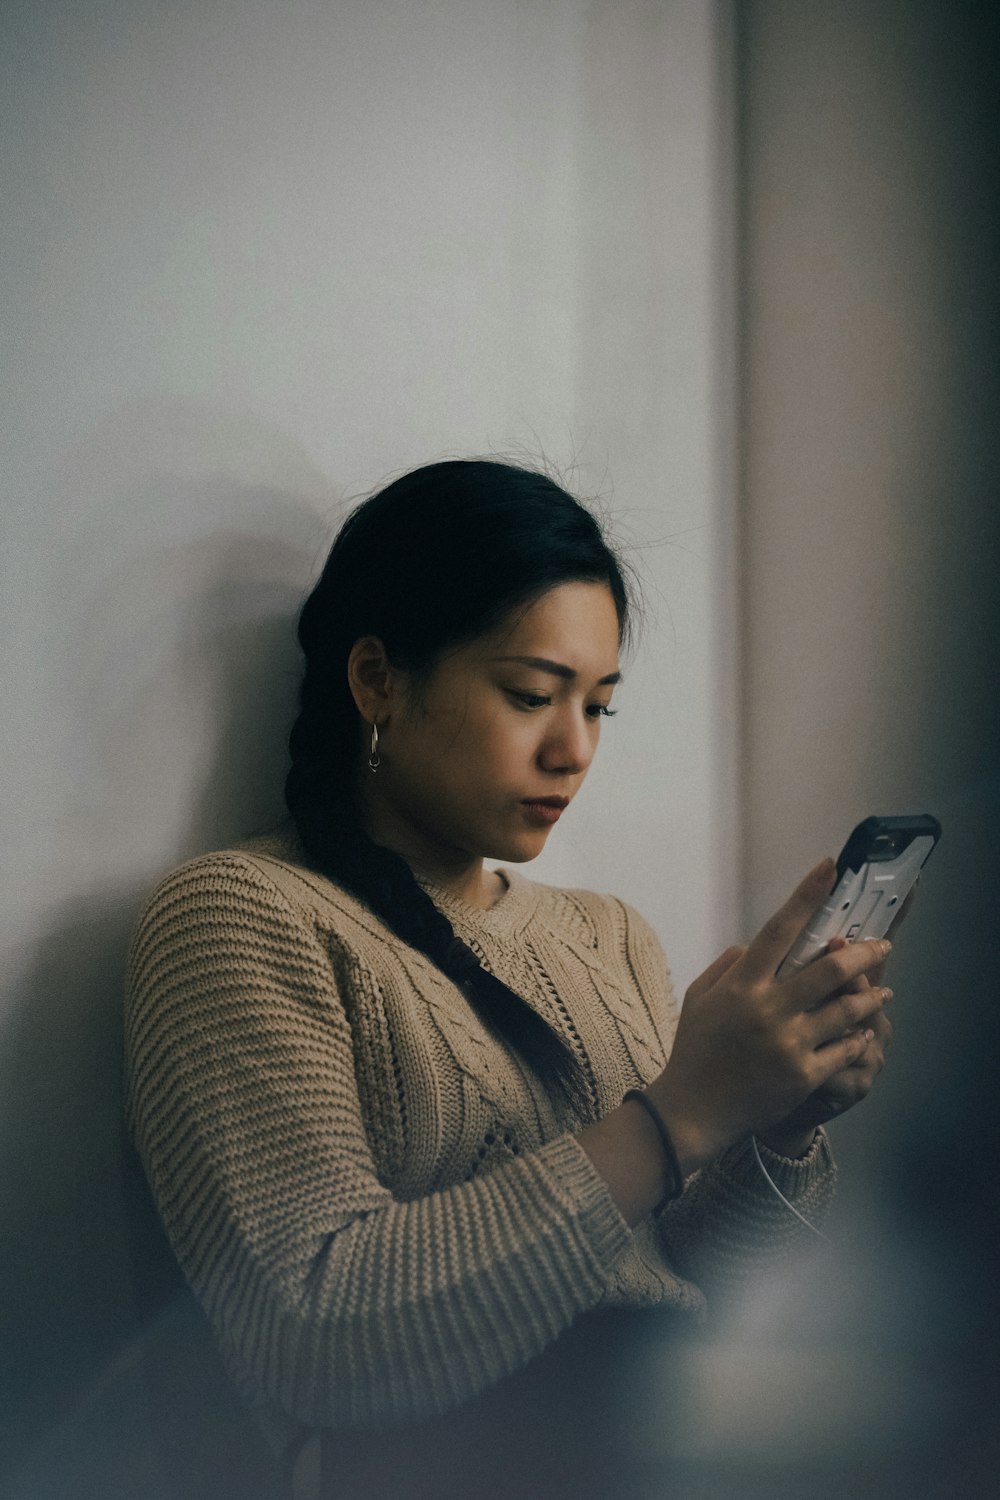 woman leaning back on white wall and using smartphone - Cyberbullying 